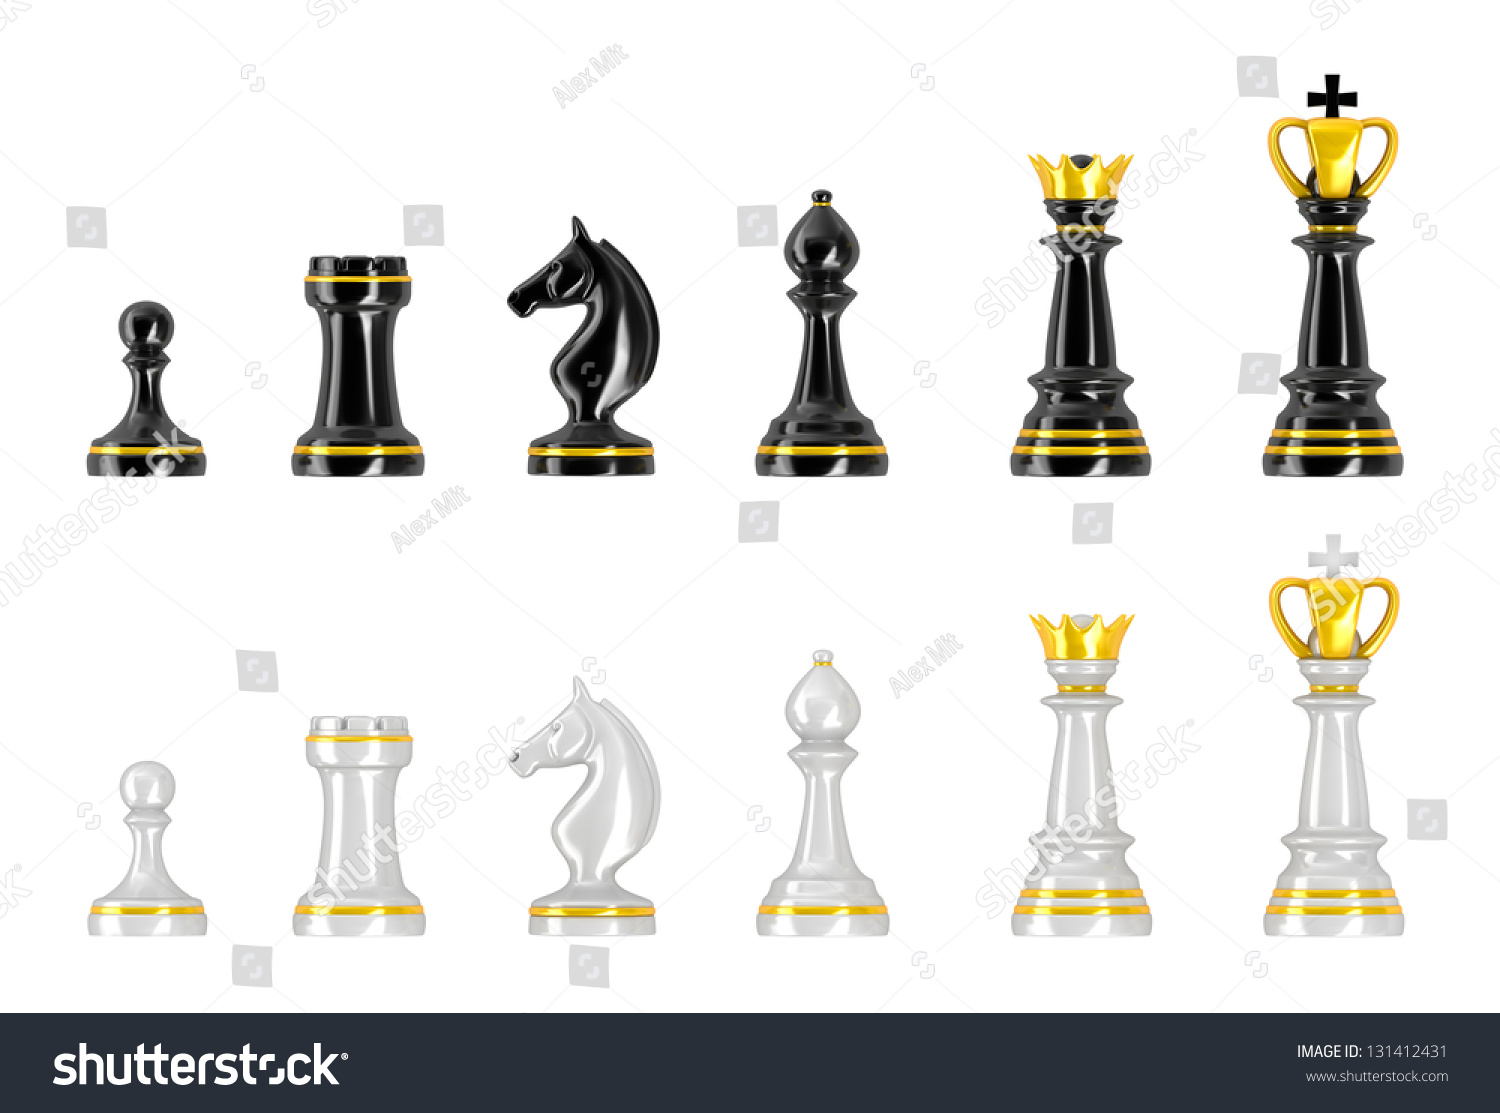 Template Of Chess Pieces Stock Photo 131412431 : Shutterstock